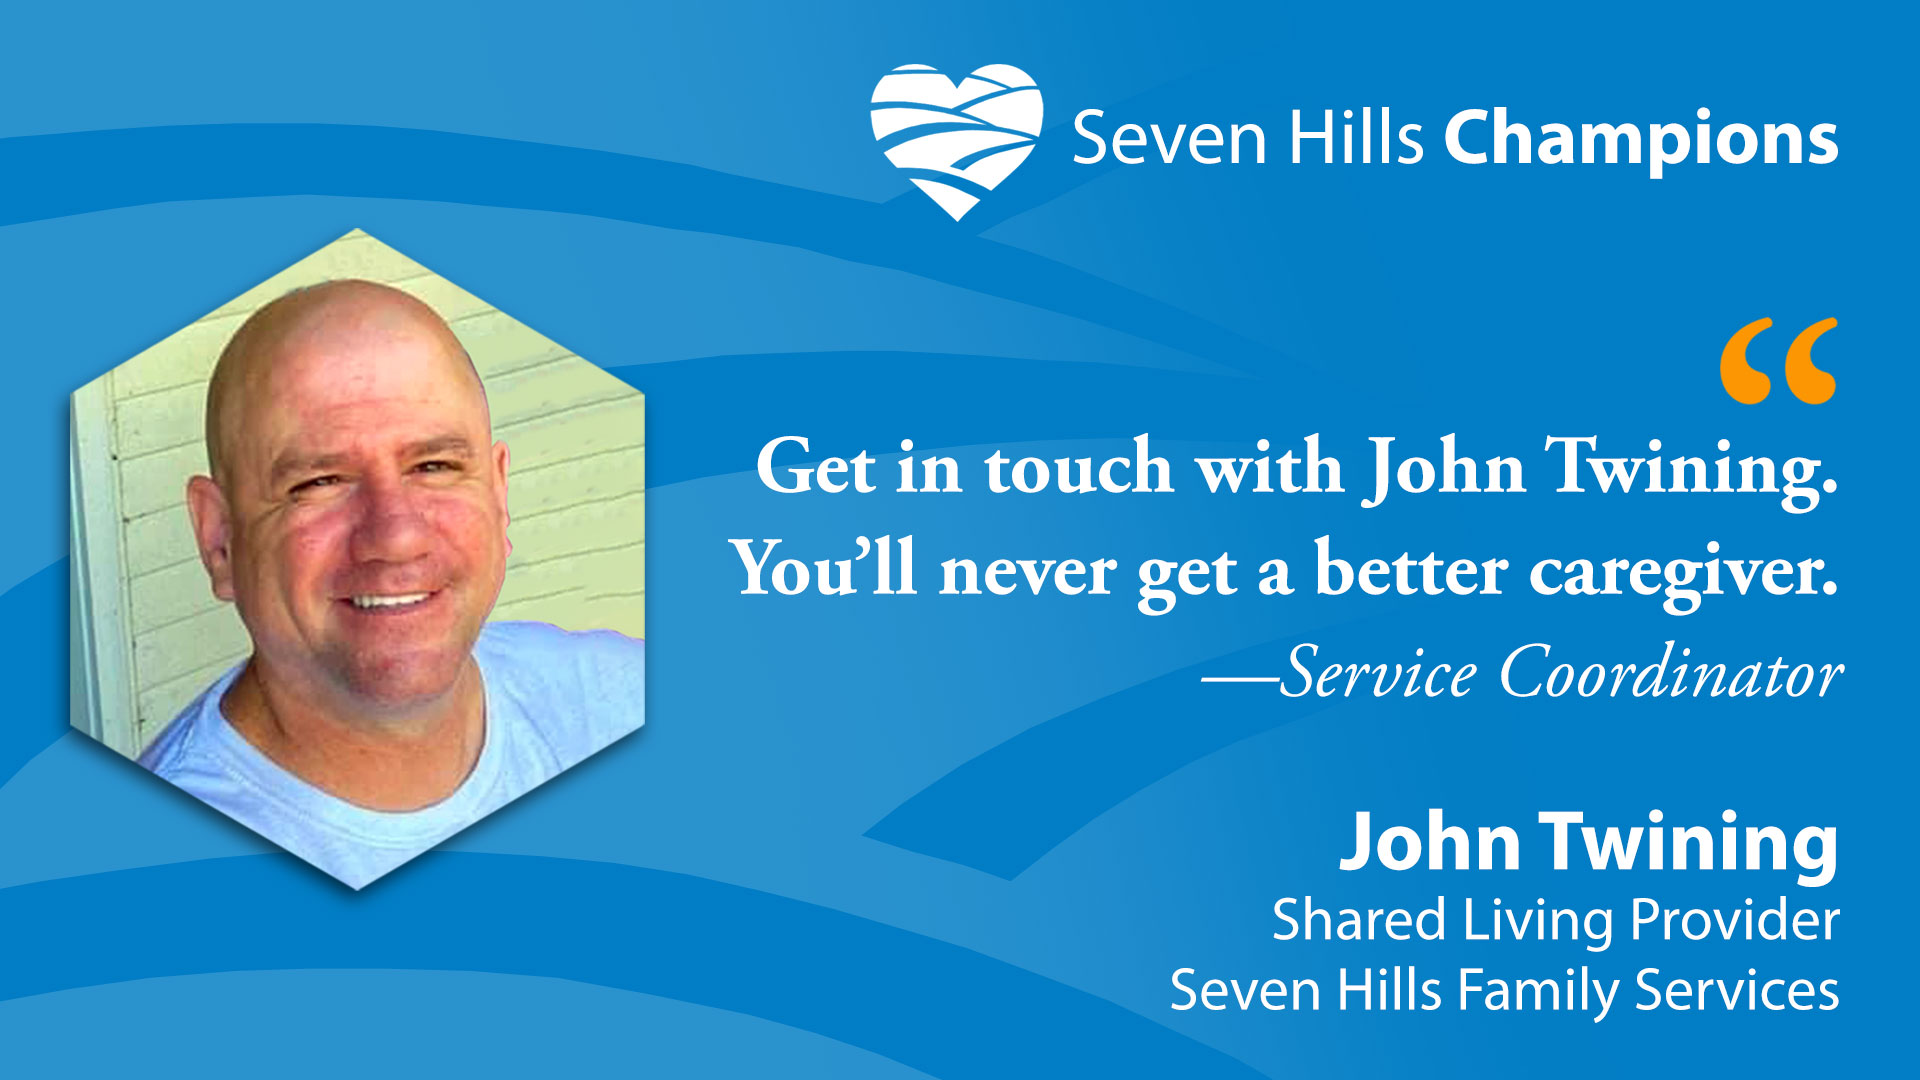 Introducing Seven Hills Champion, John Twining, Shared Living Provider: Seven Hills Family Services